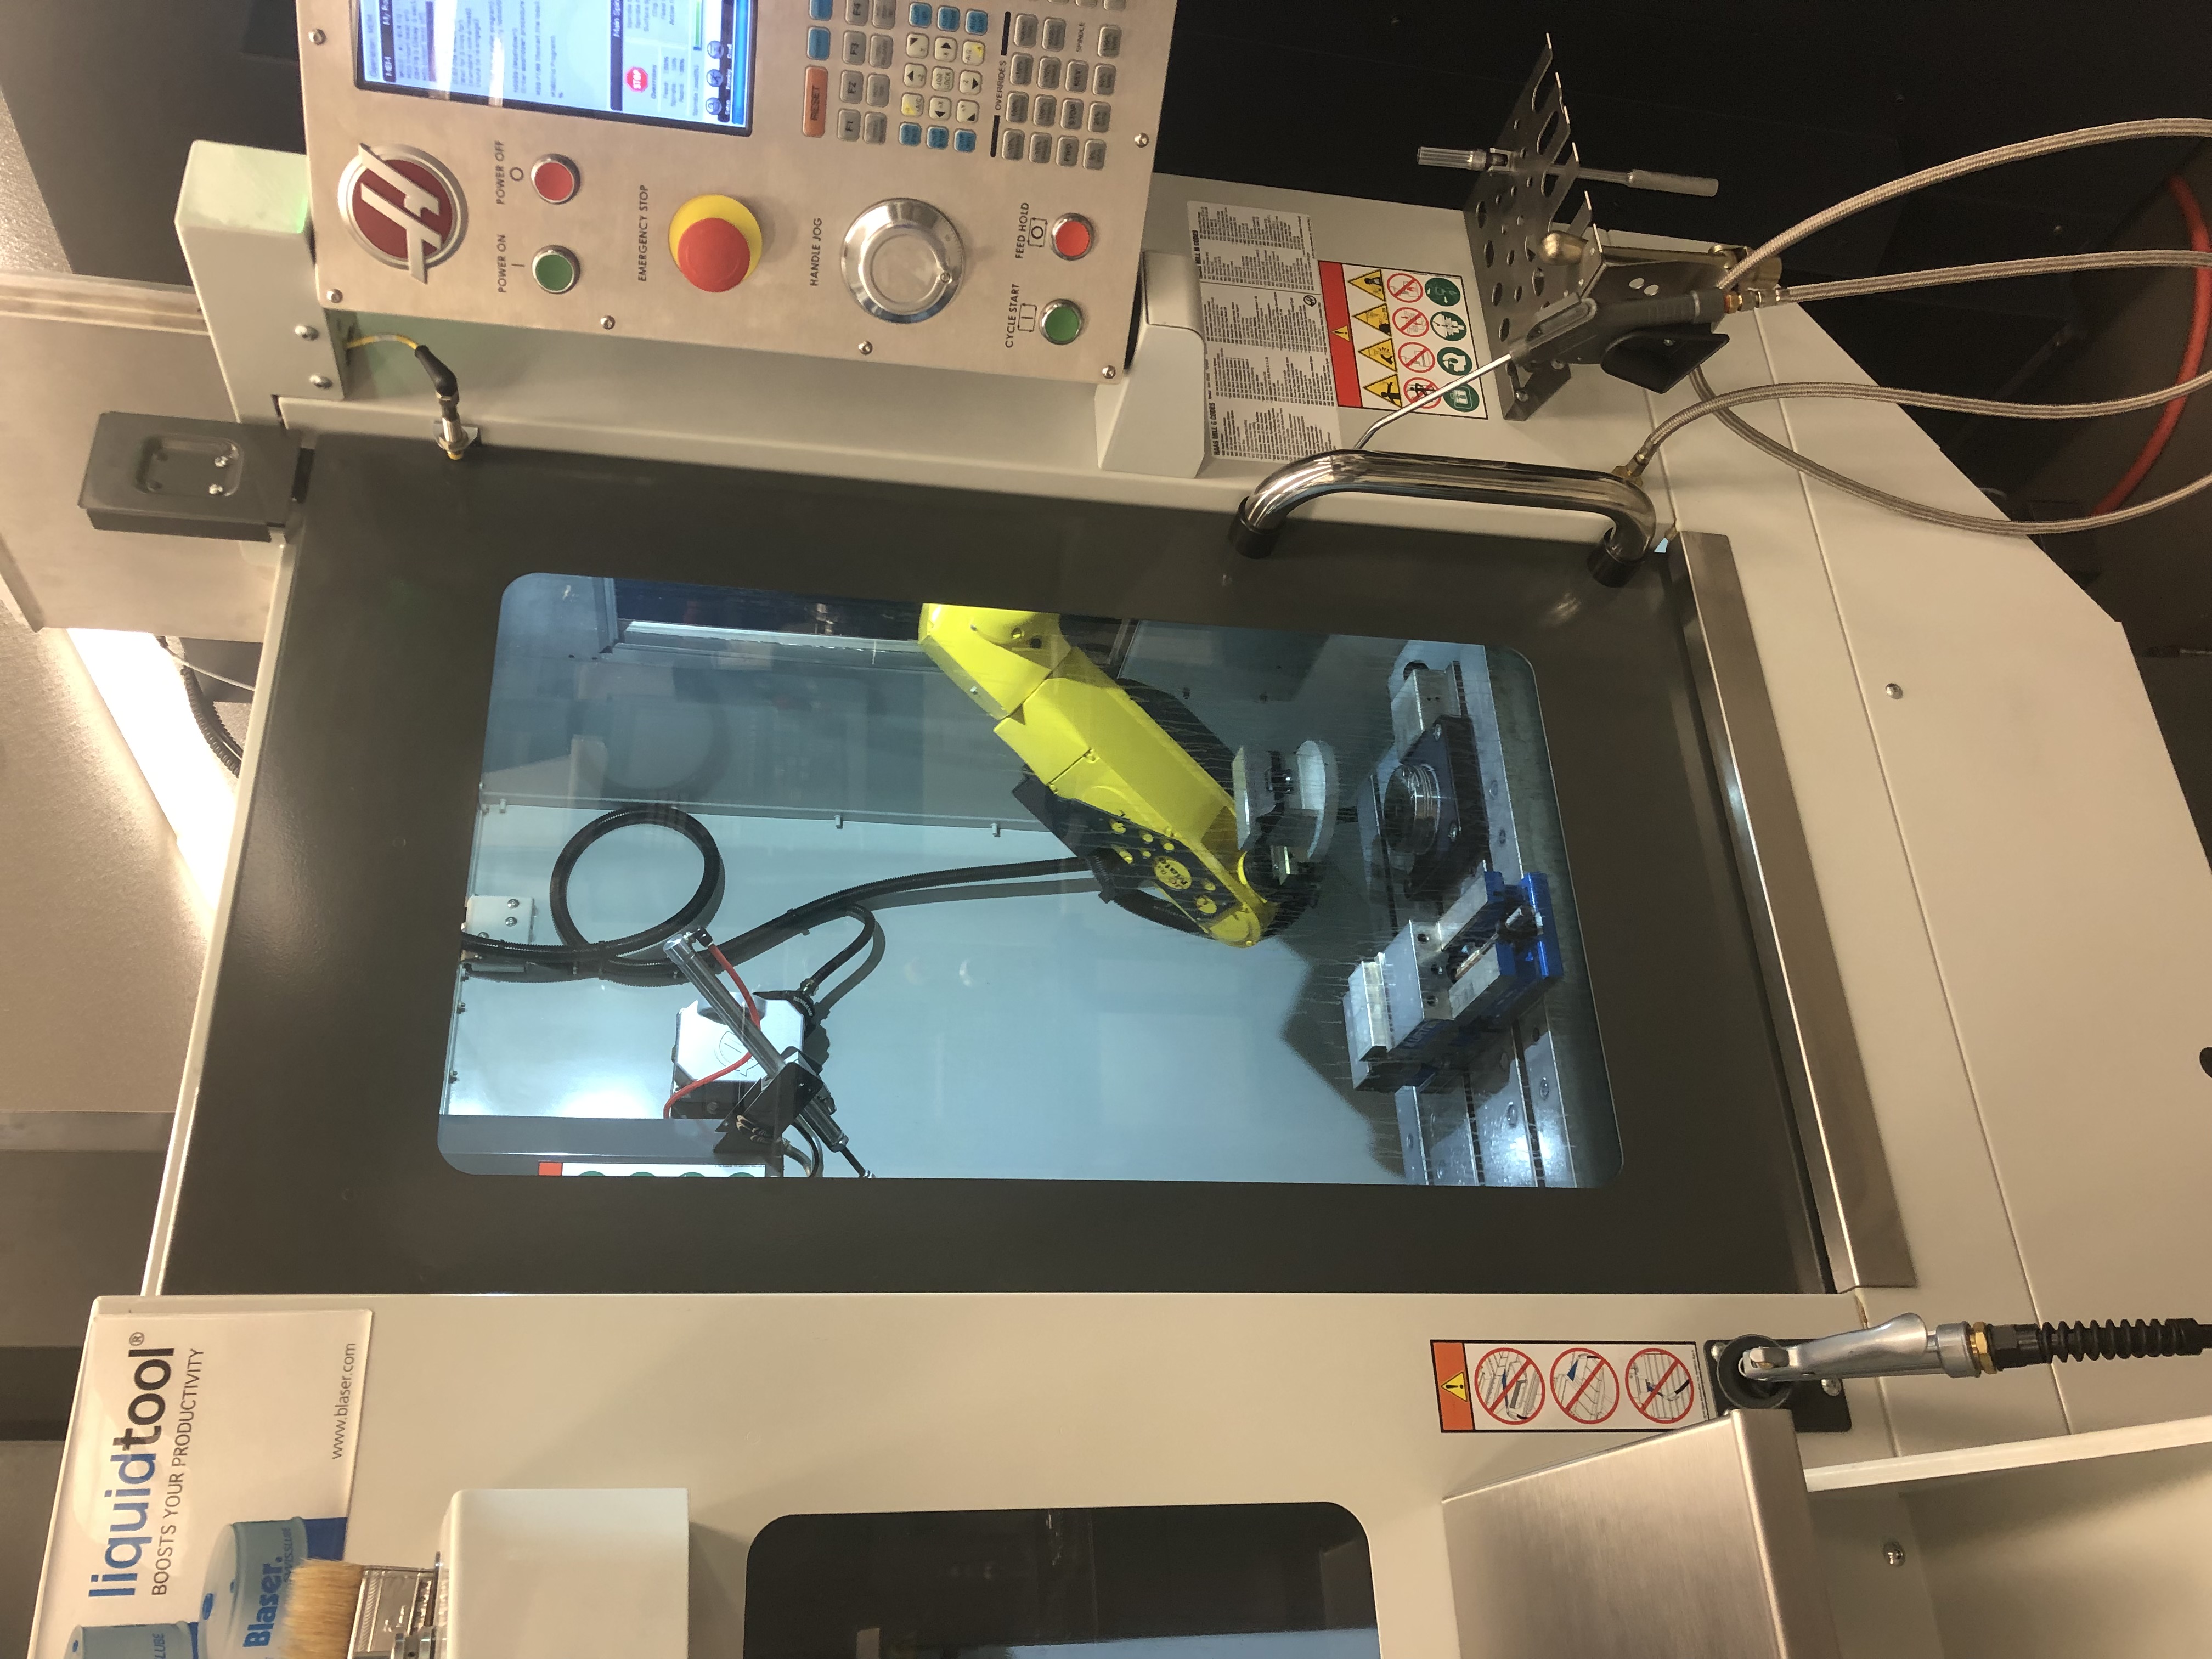 Haas DM-1 with Fanuc Robotic Cell